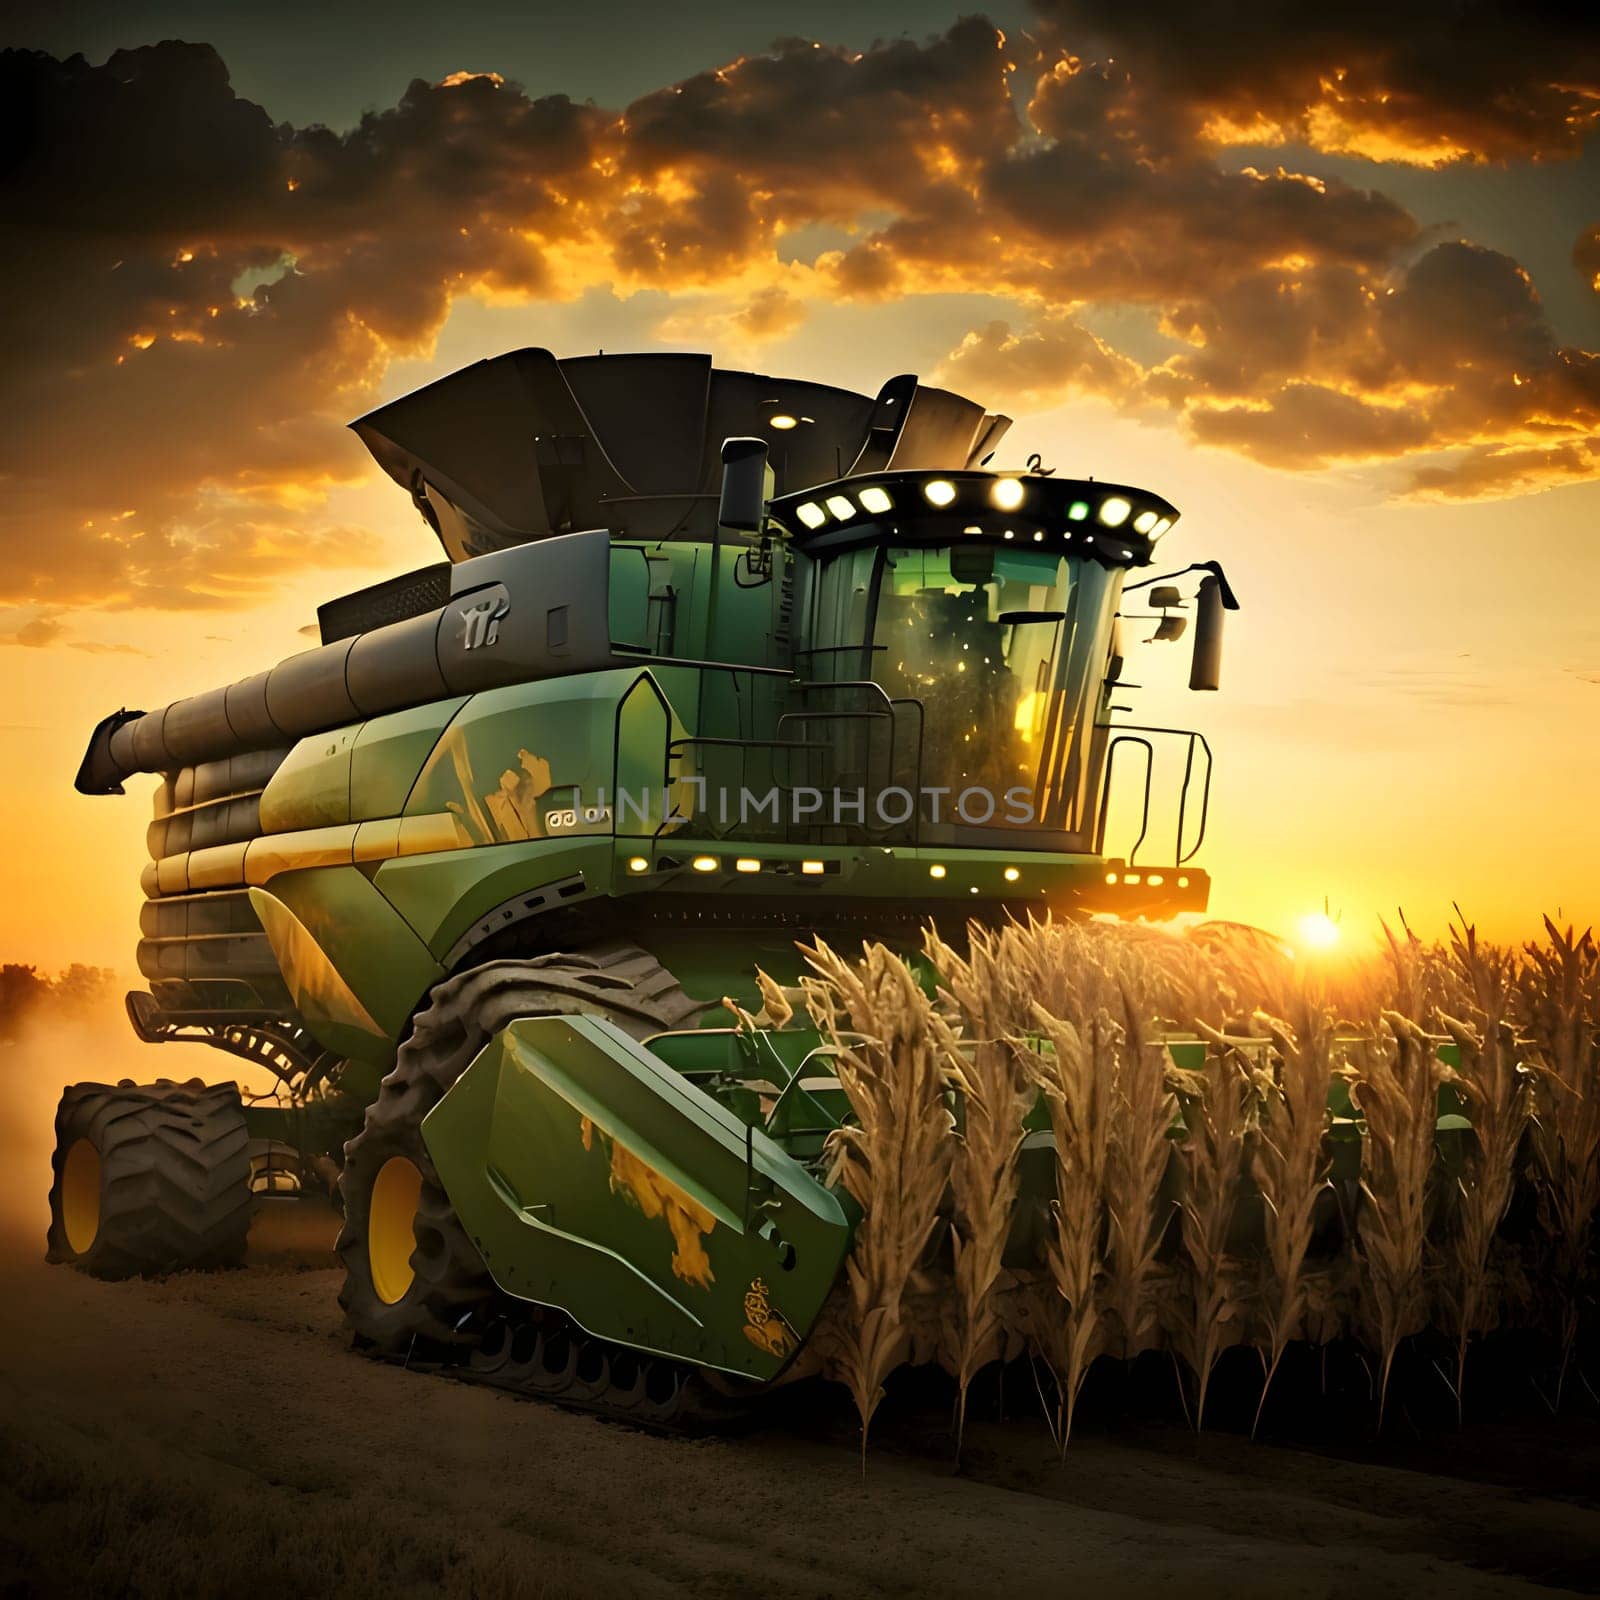 Combine during harvest in corn field sunset. Corn as a dish of thanksgiving for the harvest. by ThemesS